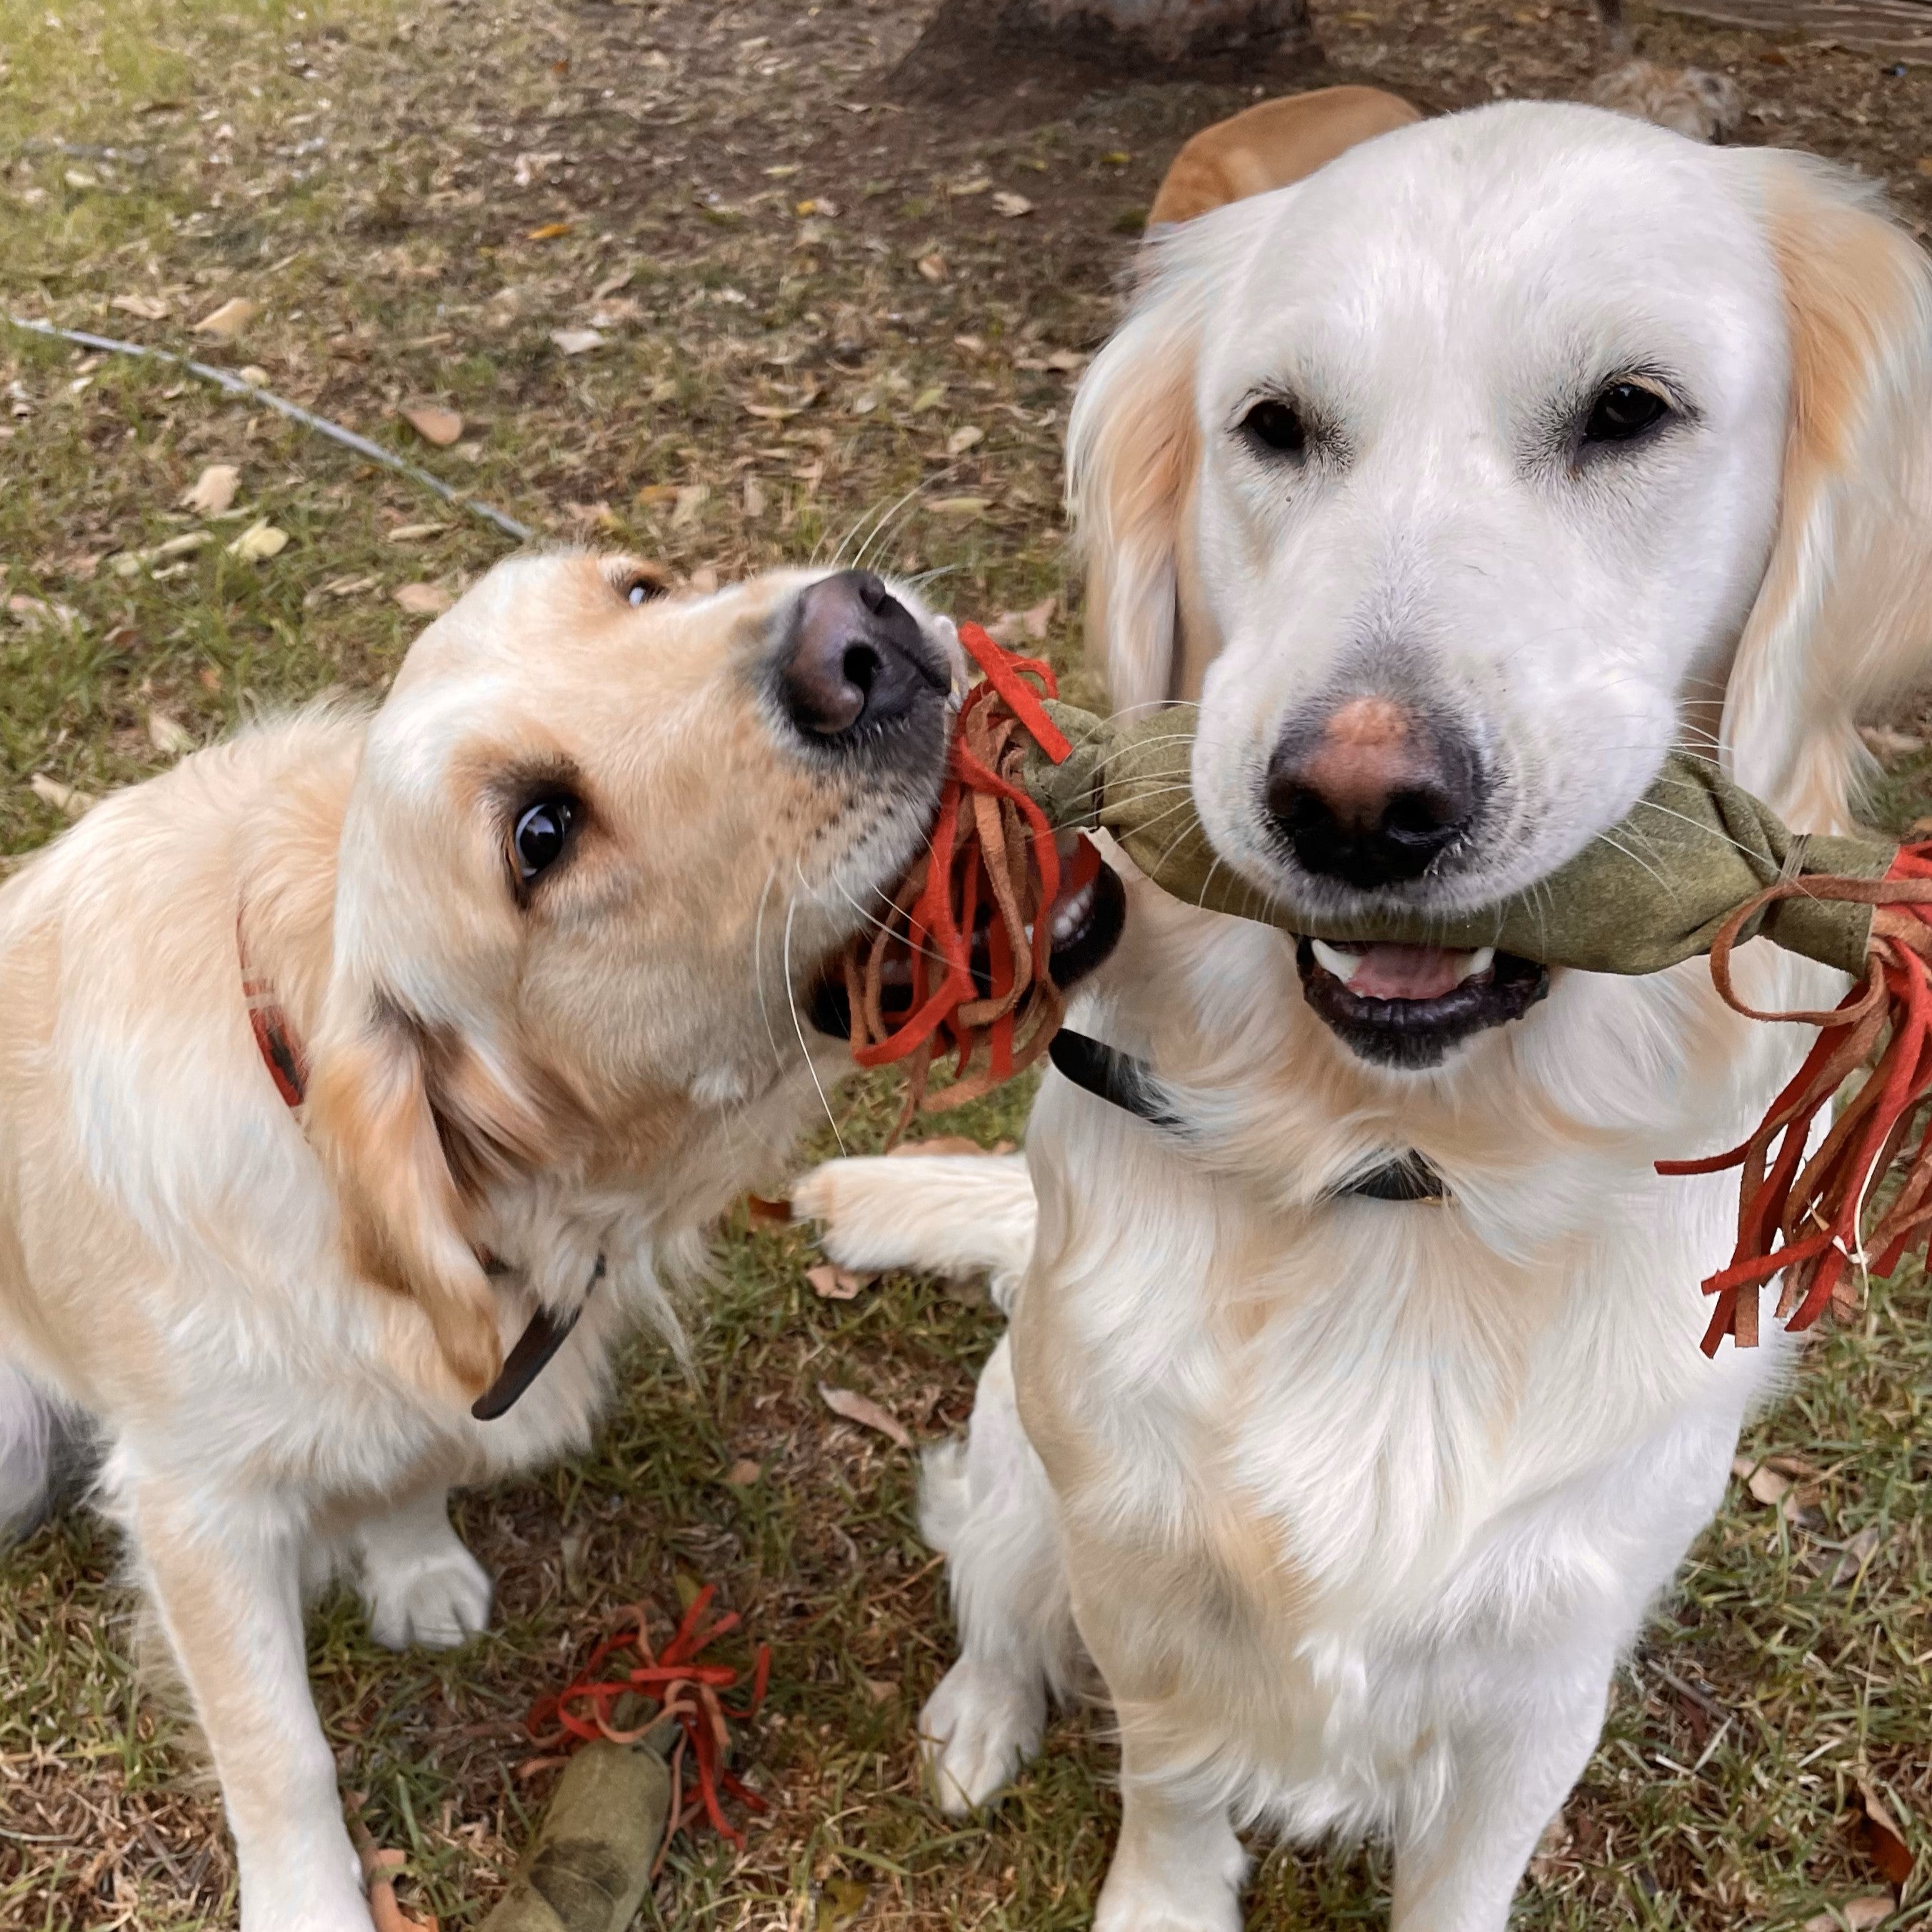 Two golden retrievers outdoors, one holding a Georgie Paws Sizzling Sausage - spinach toy in its mouth, looking at each other. The background shows grass and a tree.